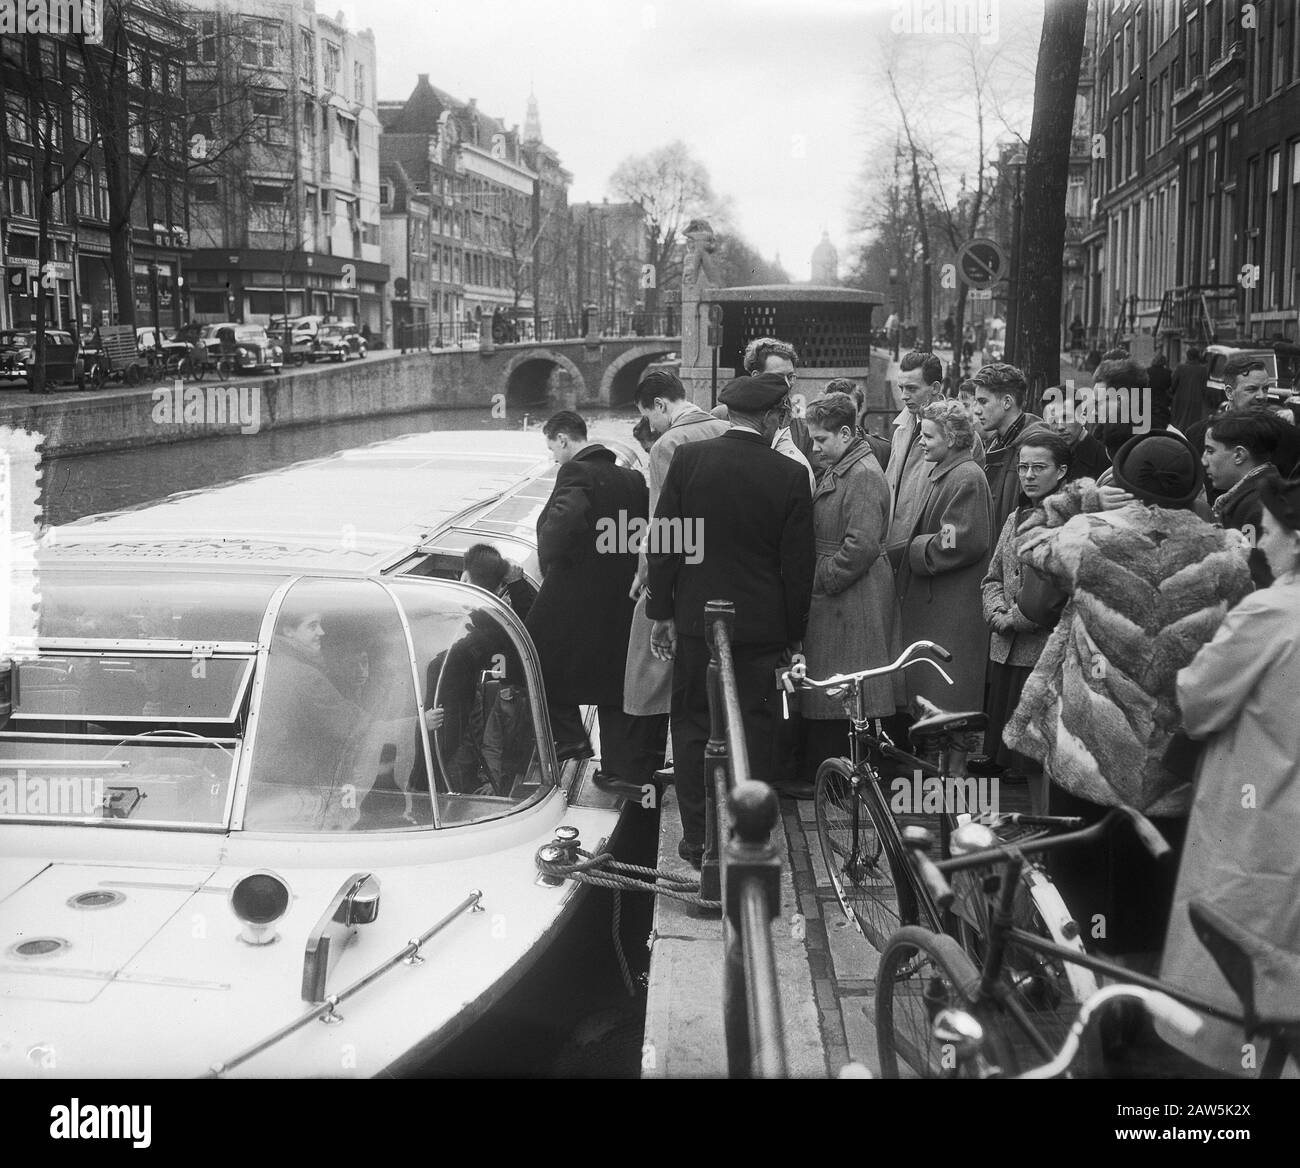 Parisian children have money from Disaster to Mayor of Amsterdam. Roundtrip Date: April 1, 1953 Location: Amsterdam, Noord-Holland Keywords: mayors, children, tours Stock Photo